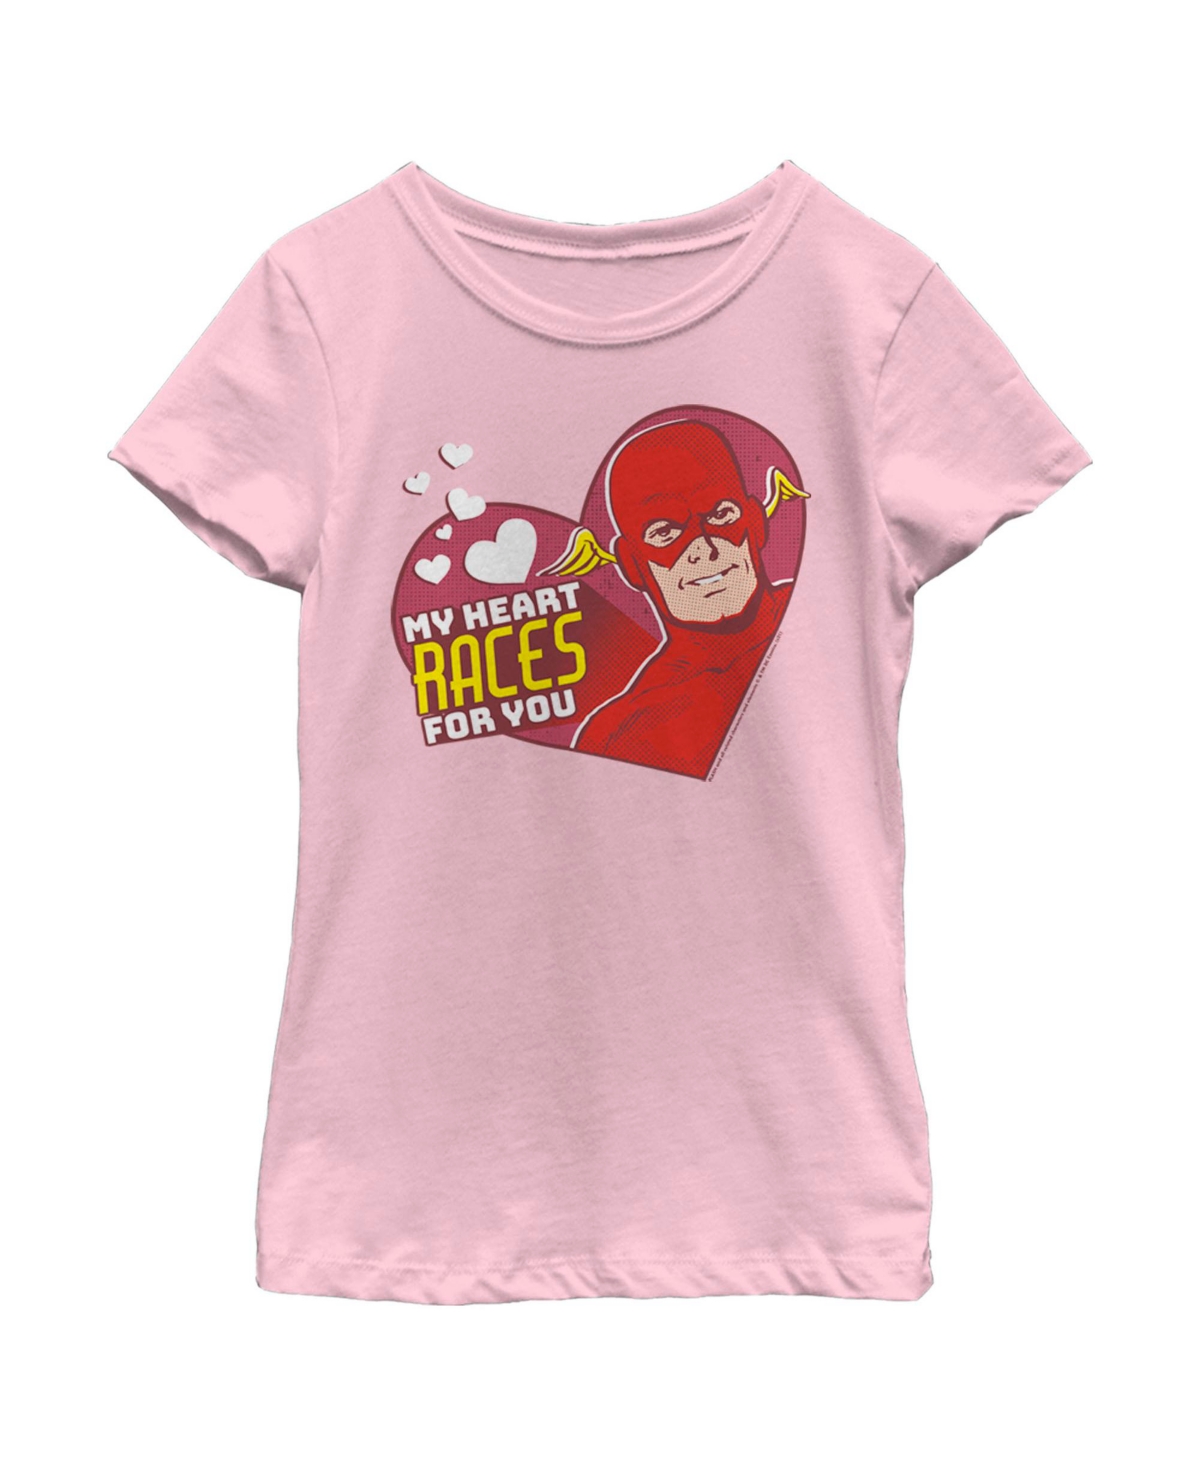 Dc Comics Girl's The Flash Valentine's Day My Heart Races For You Child T-shirt In Light Pink